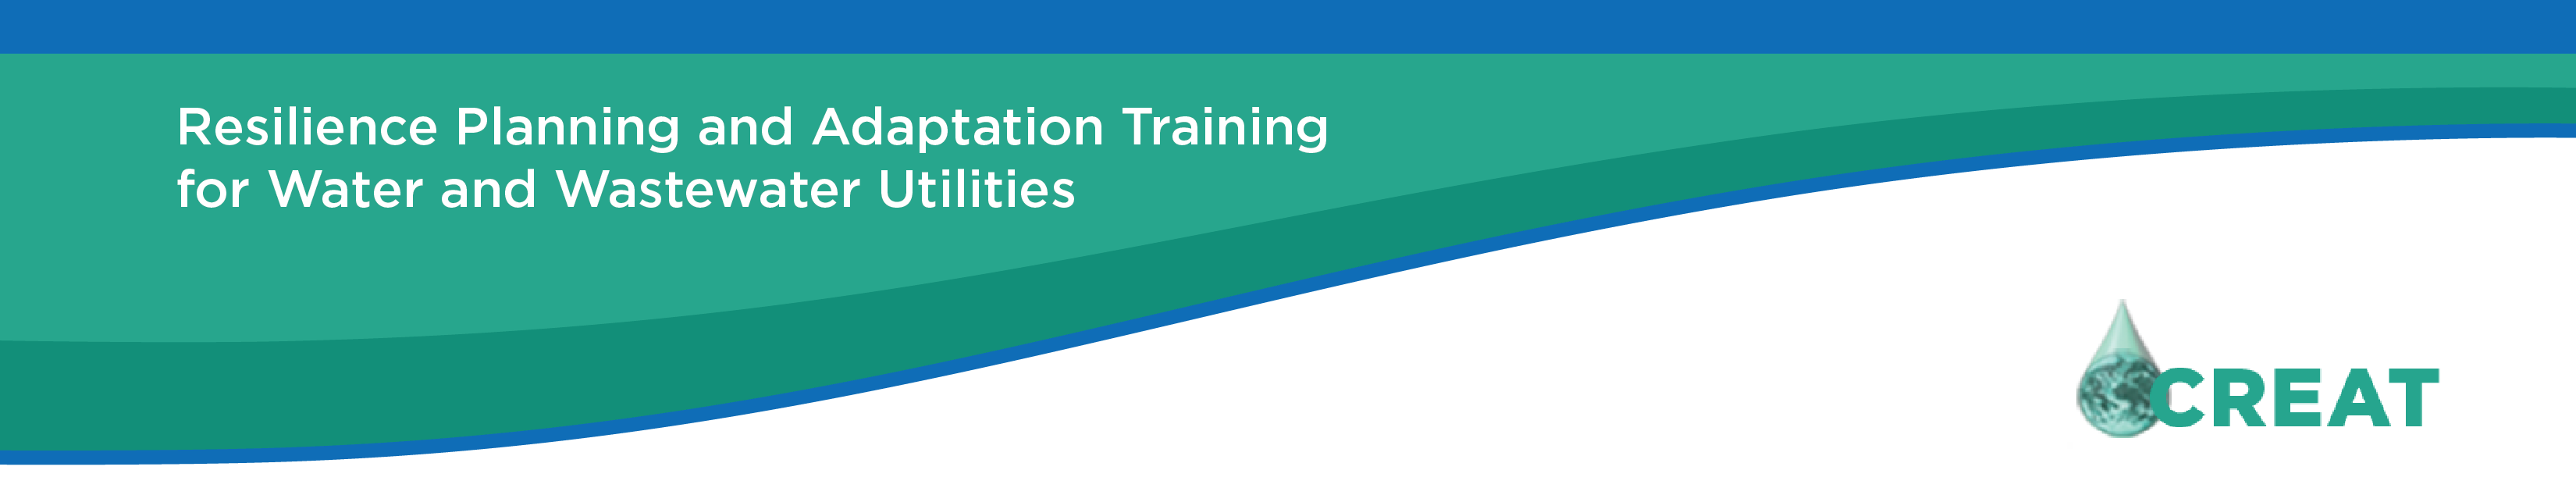 Resilience Planning and Adaptation Training for Water and Wastewater Utilities